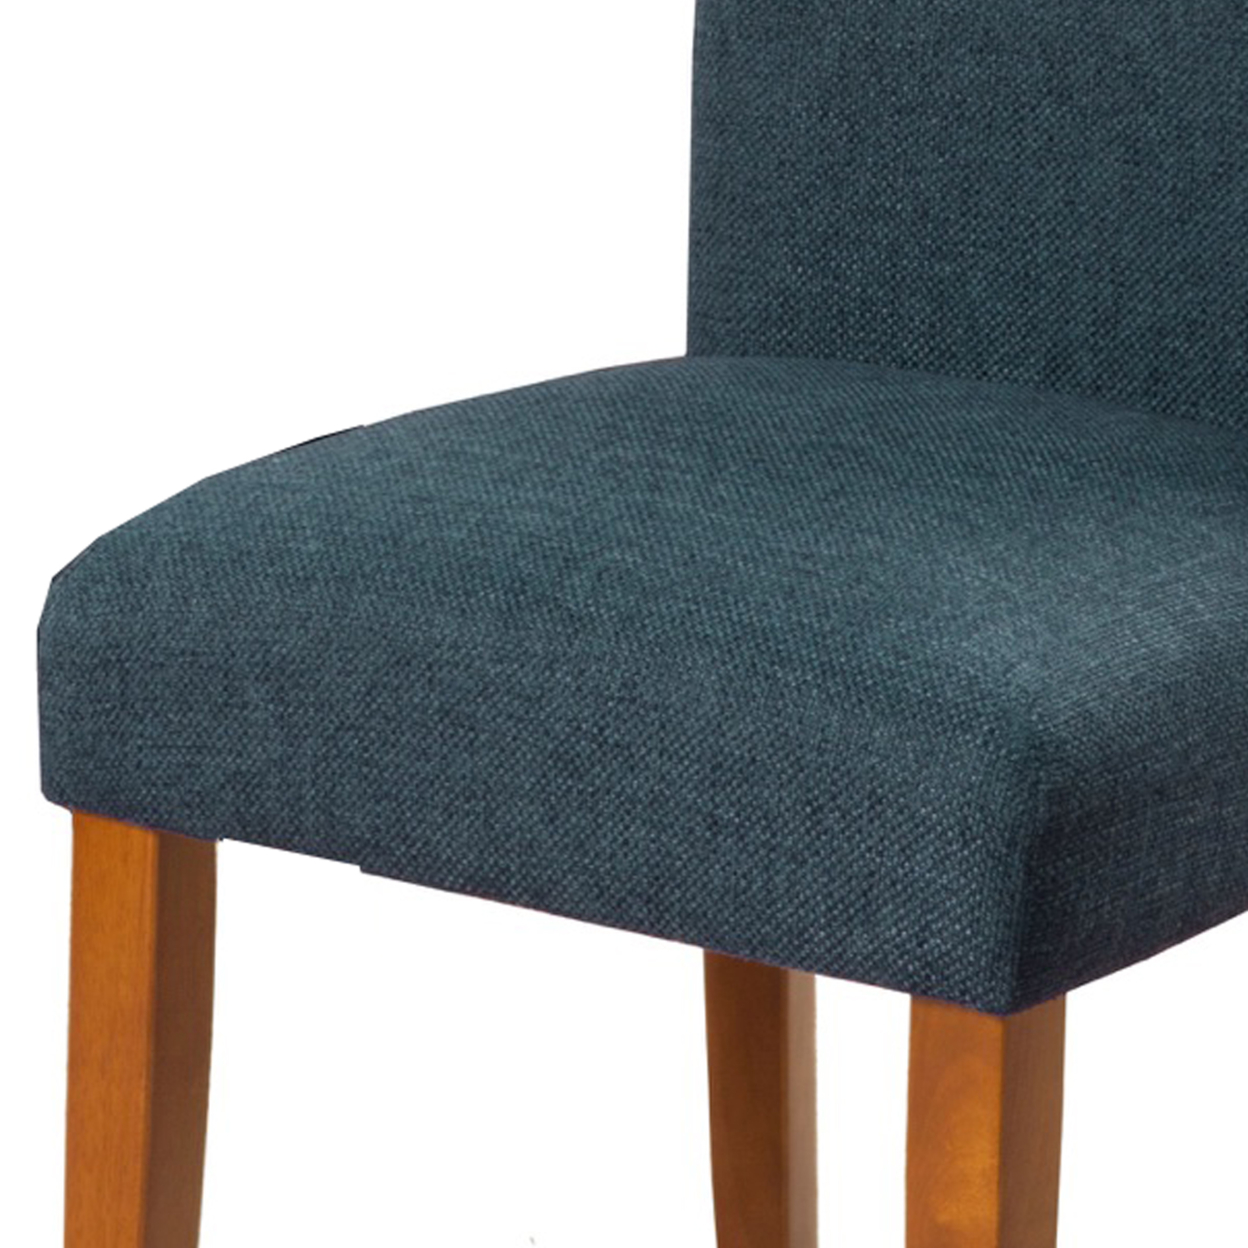 Fabric Upholstered Parson Dining Chair With Wooden Legs, Navy Blue And Brown, Set Of Two- Saltoro Sherpi